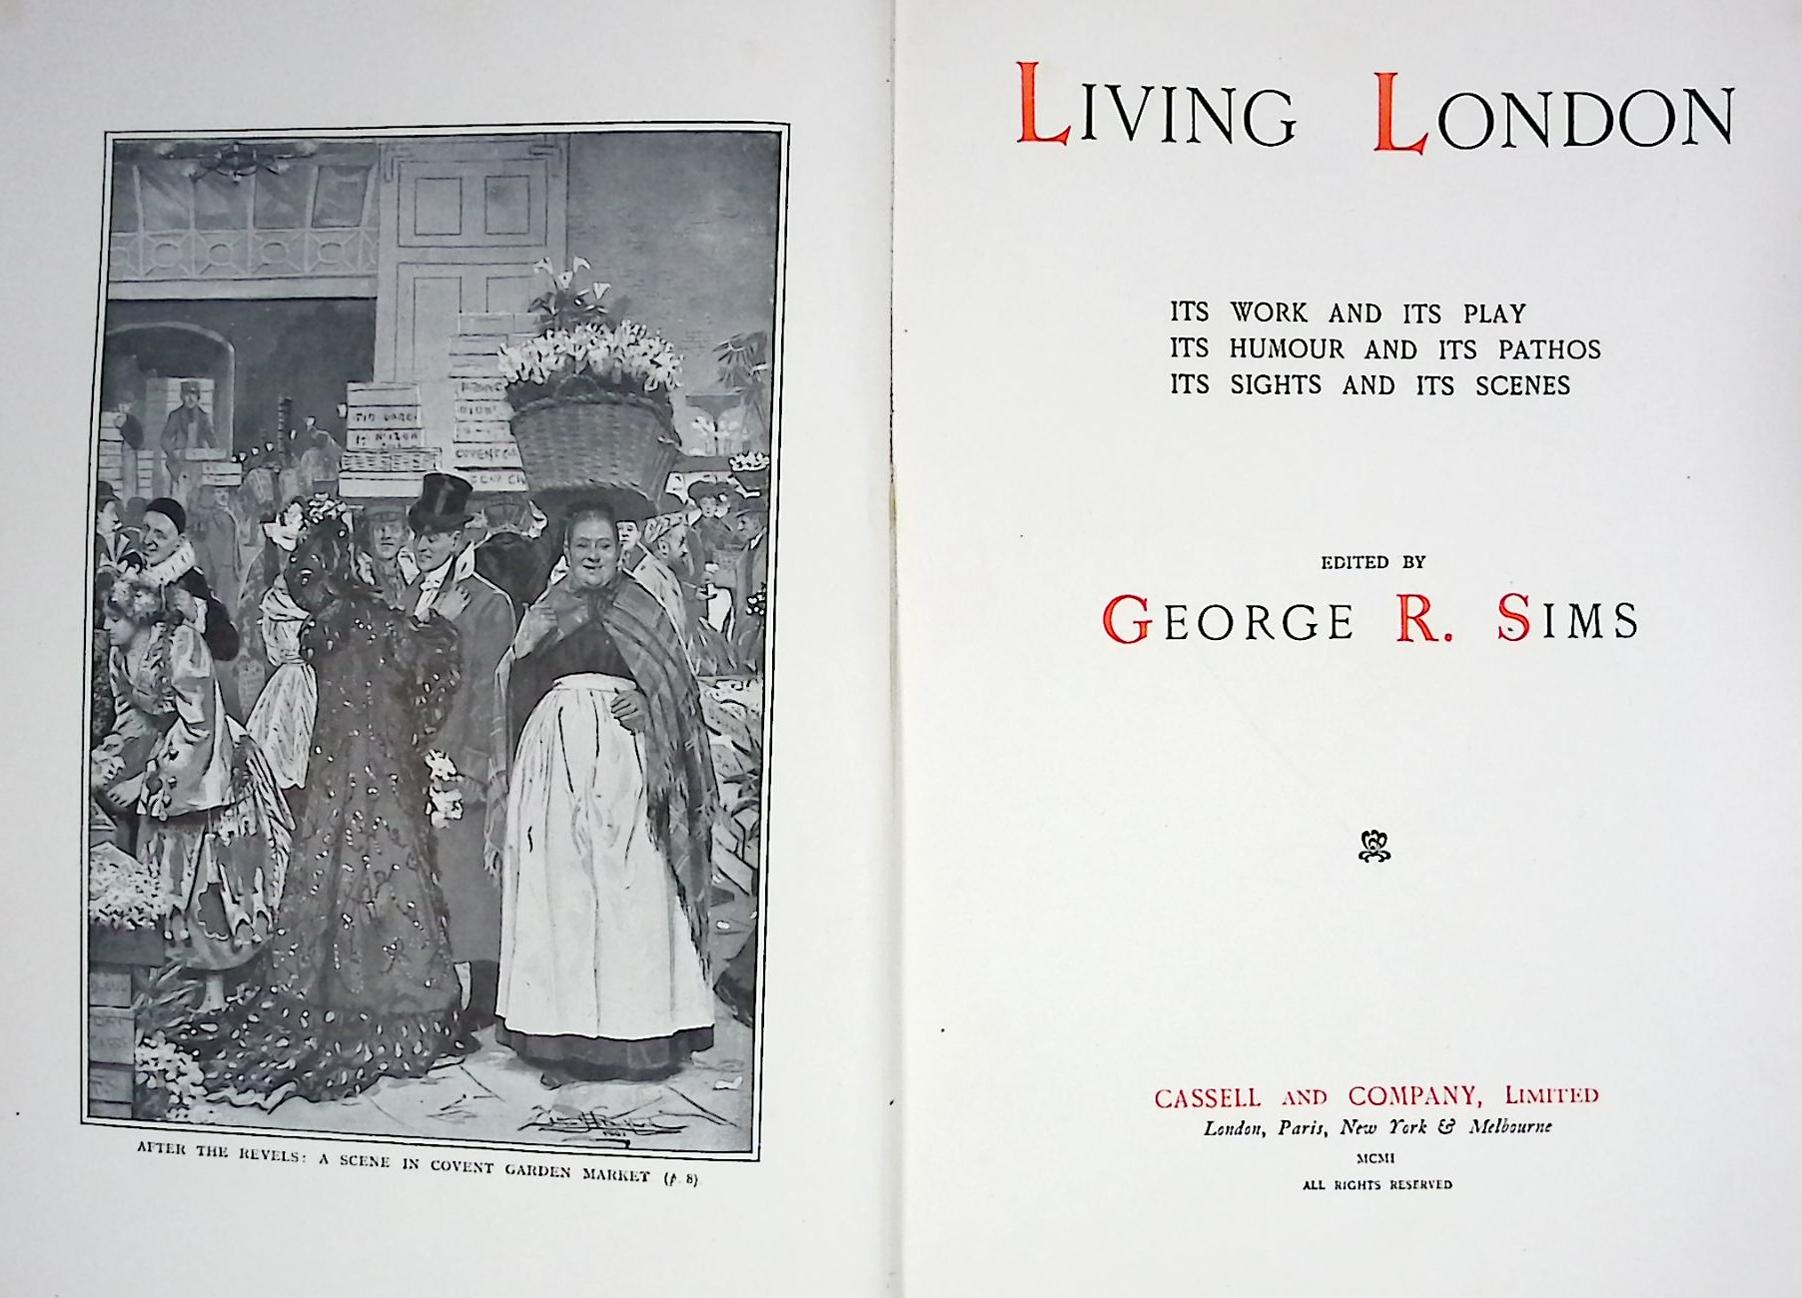 Living London: Its Work and its Play. Its Humour and its Pathos. Its Sights and its Scenes. Volume I.